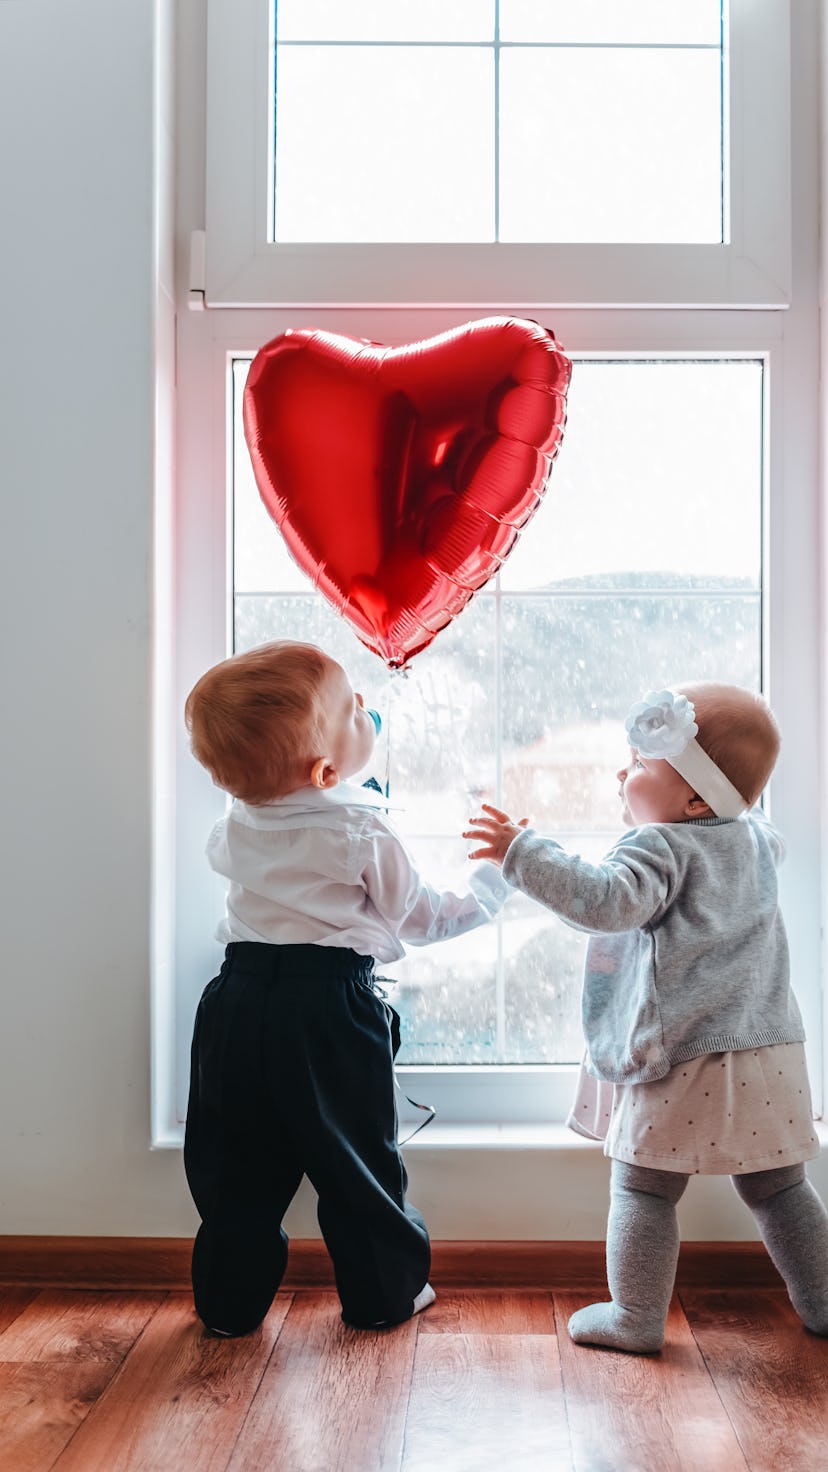 Cute baby boy and baby girl looking at the red heart balloon for Valentine's Day photoshoot.